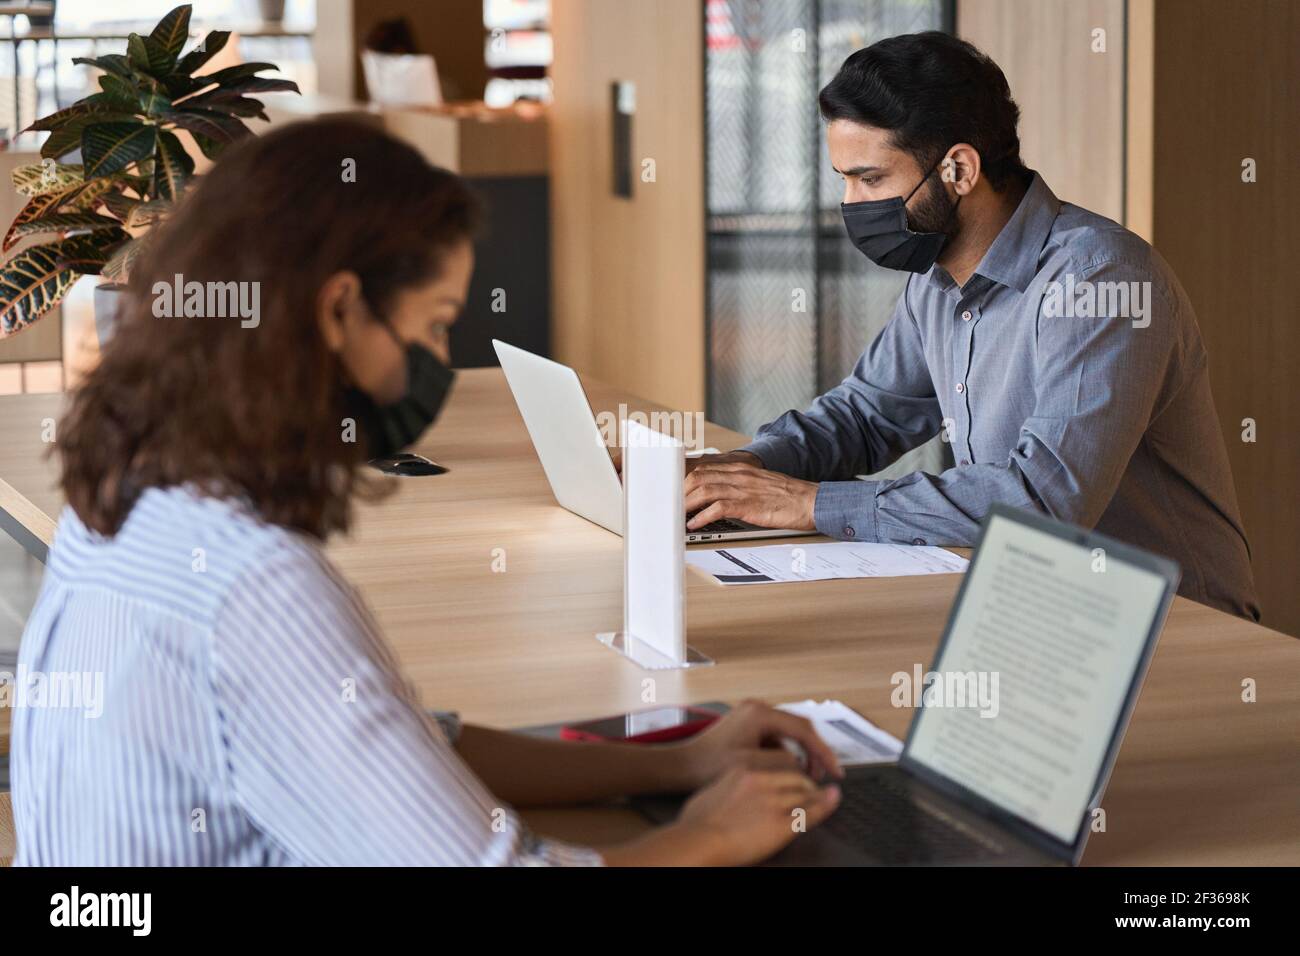 Diverse people wearing face masks working on laptops keeping safe distance. Stock Photo